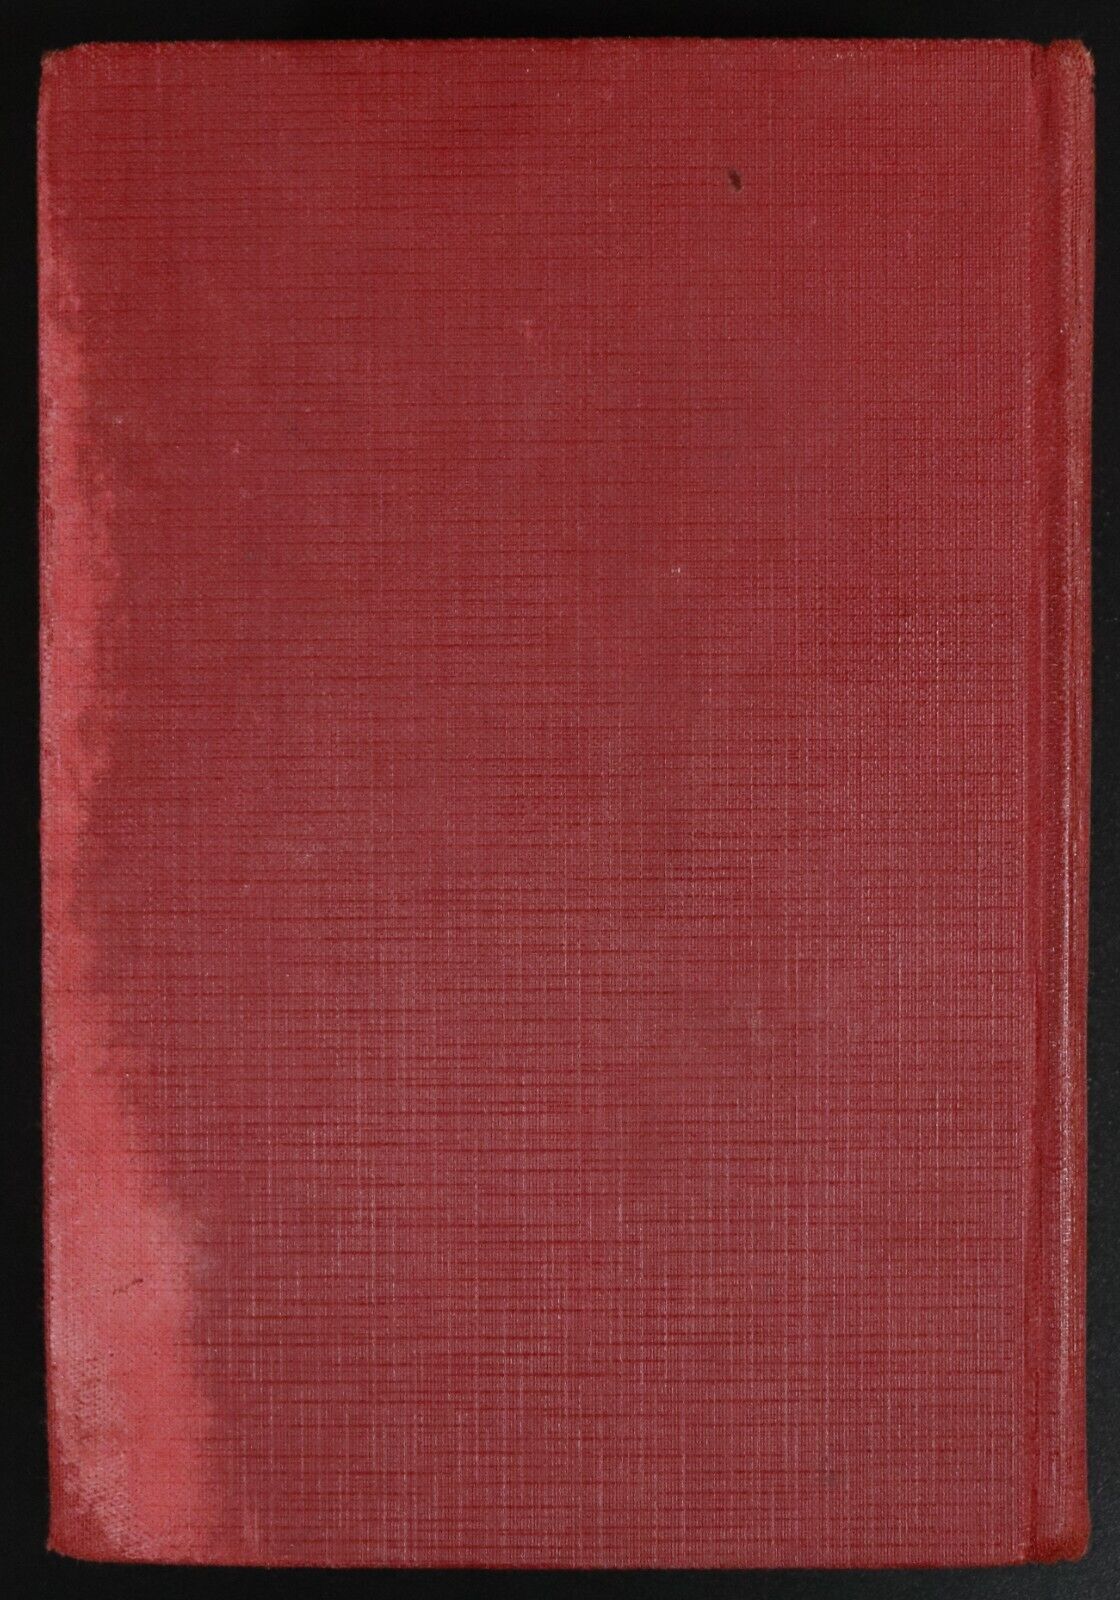 1938 Death In The Morning by Harry Hodge Antique Australian Fiction Book